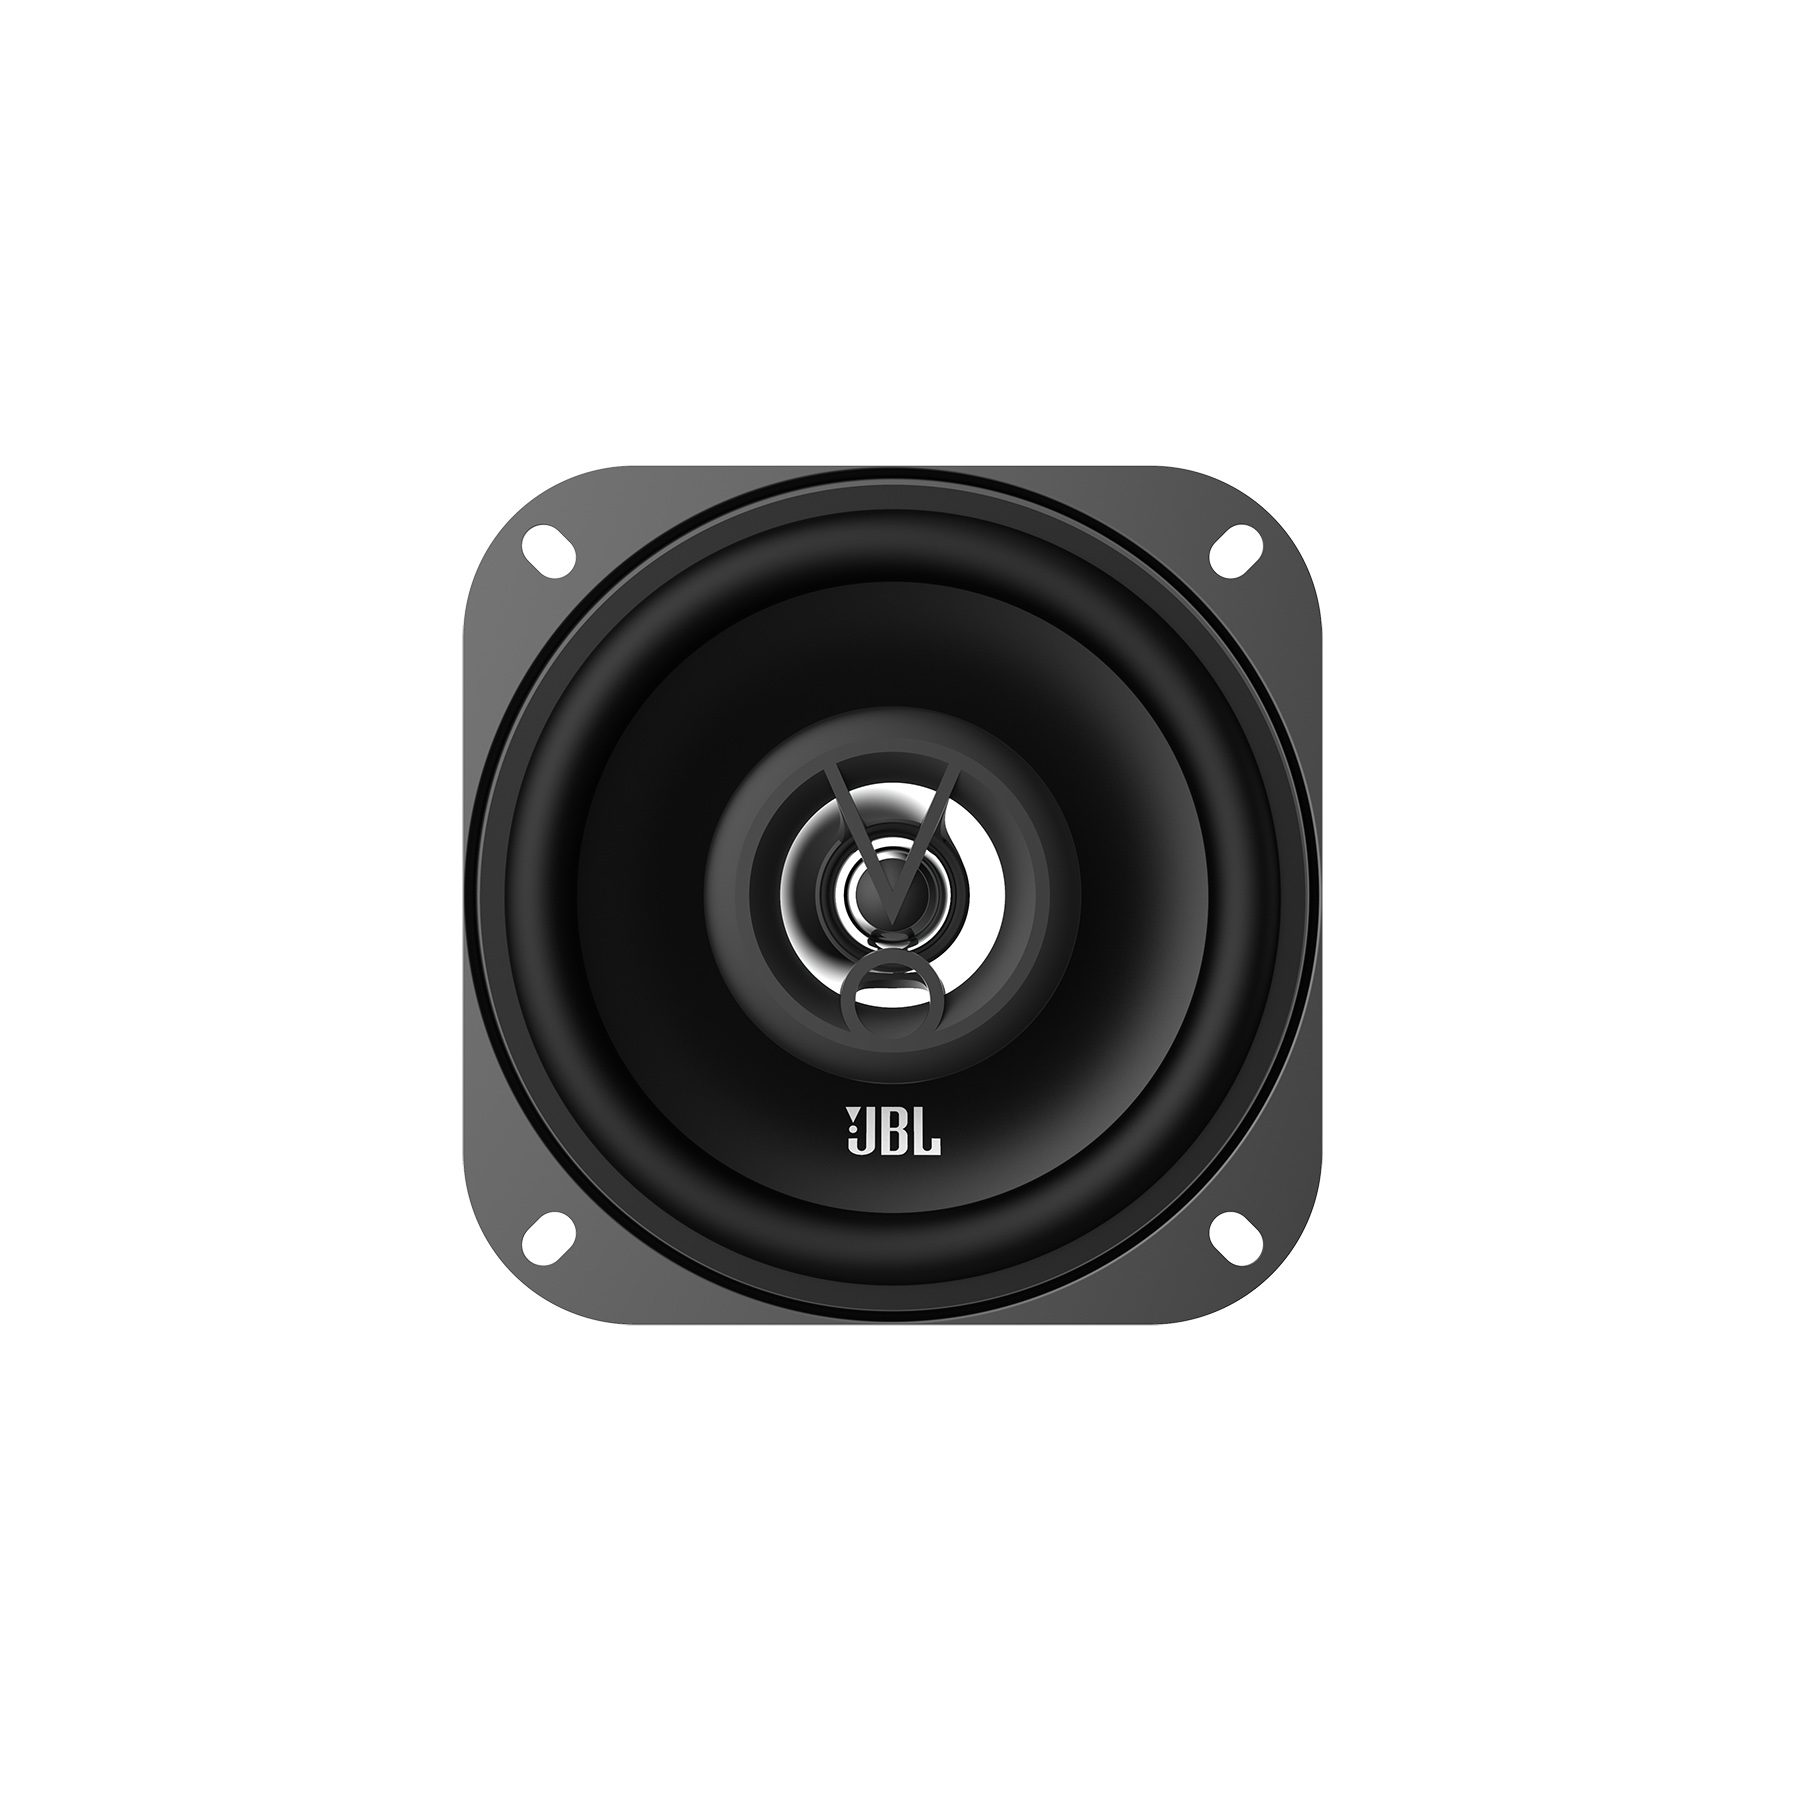 Stage1 41F, Car Speakers, 4″ Coaxial, No Grill